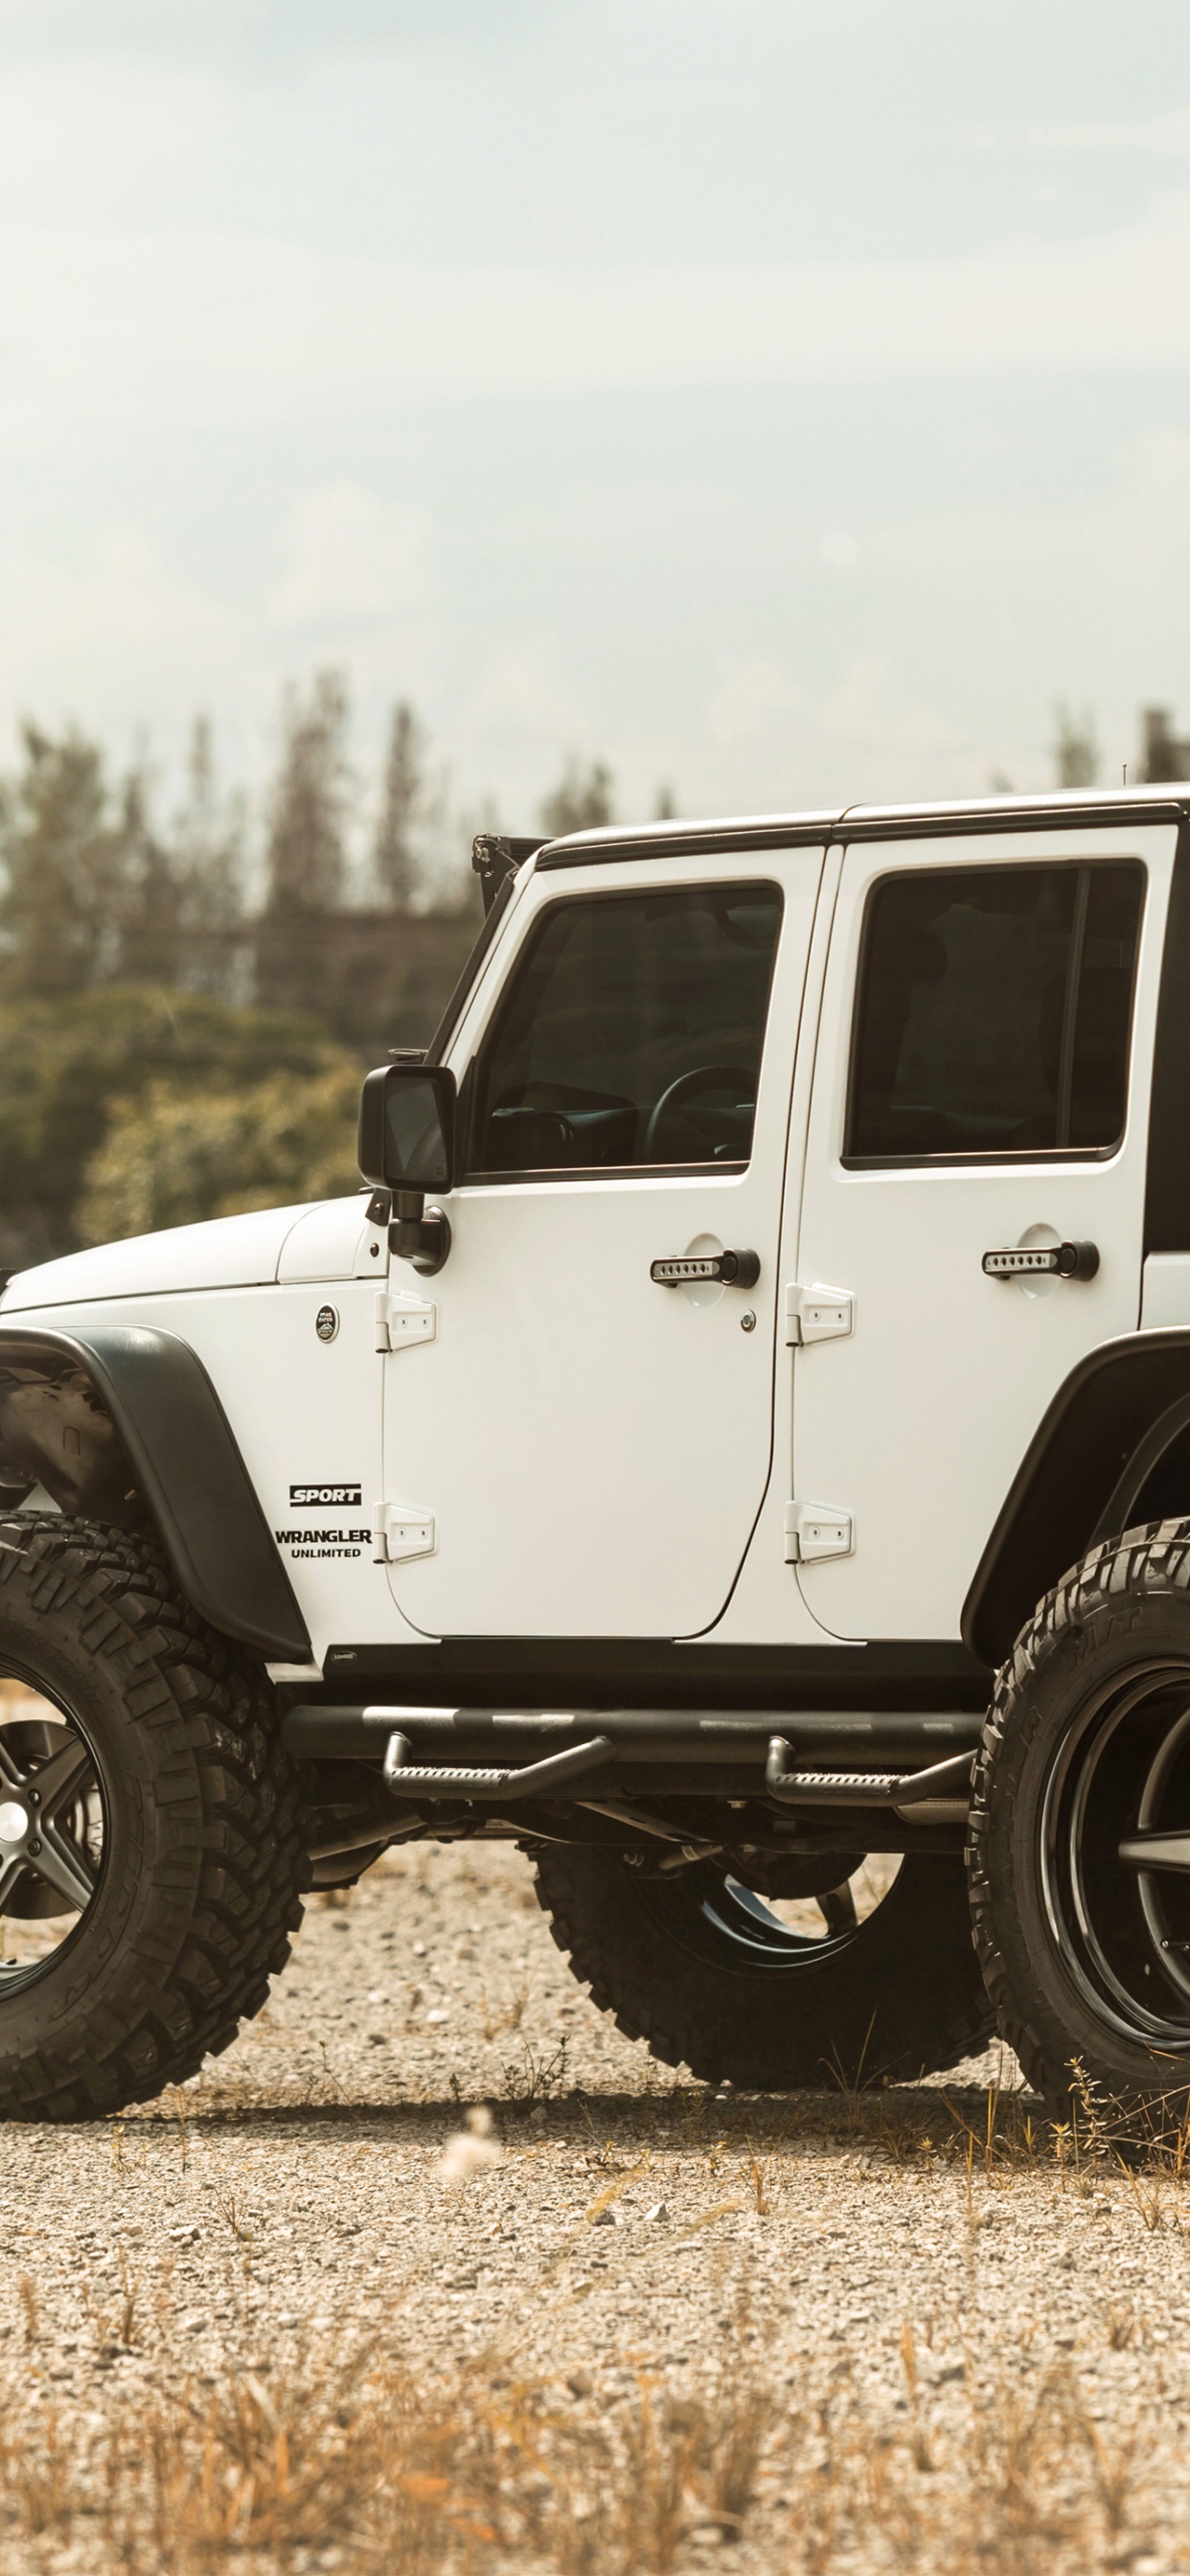 White and Black Jeep Wrangler on Brown Field During Daytime. Wallpaper in 1242x2688 Resolution